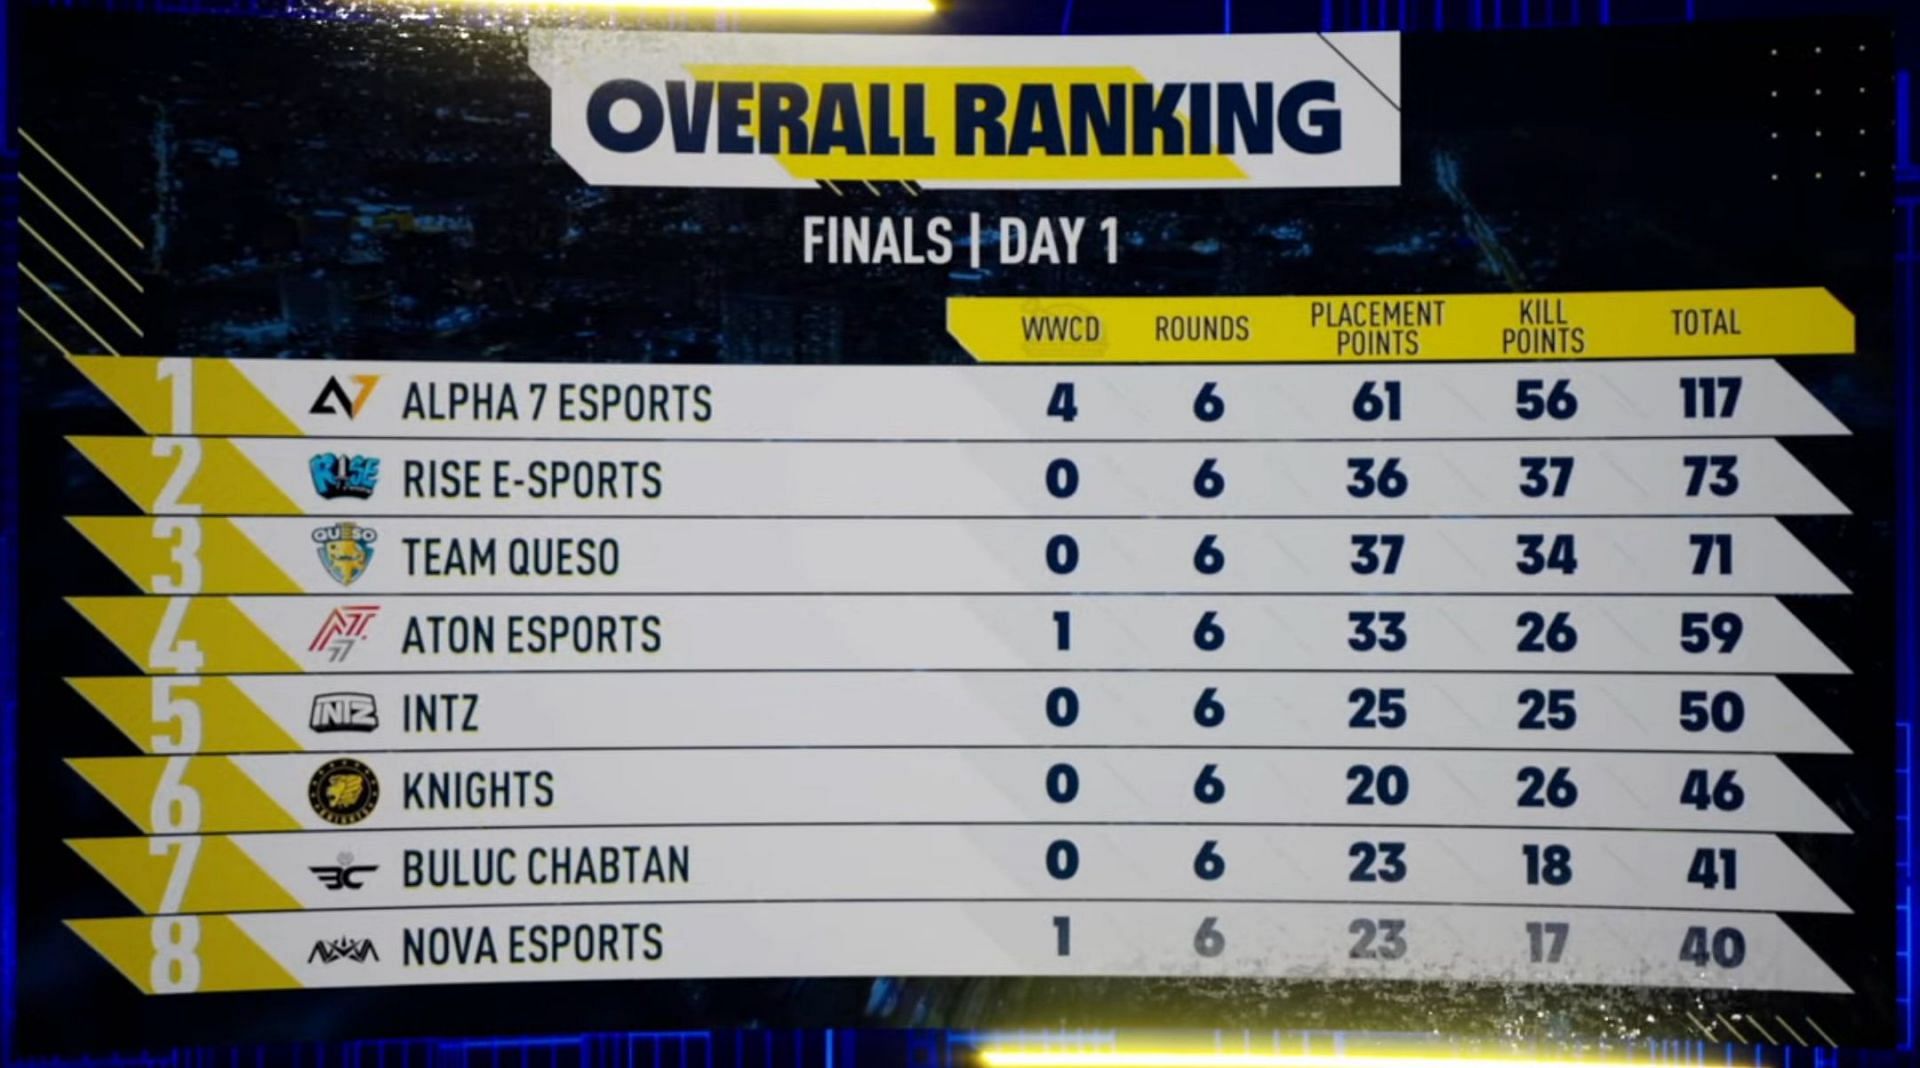 Alpha 7 leads overall standings after PMPL Americas Championship day 1